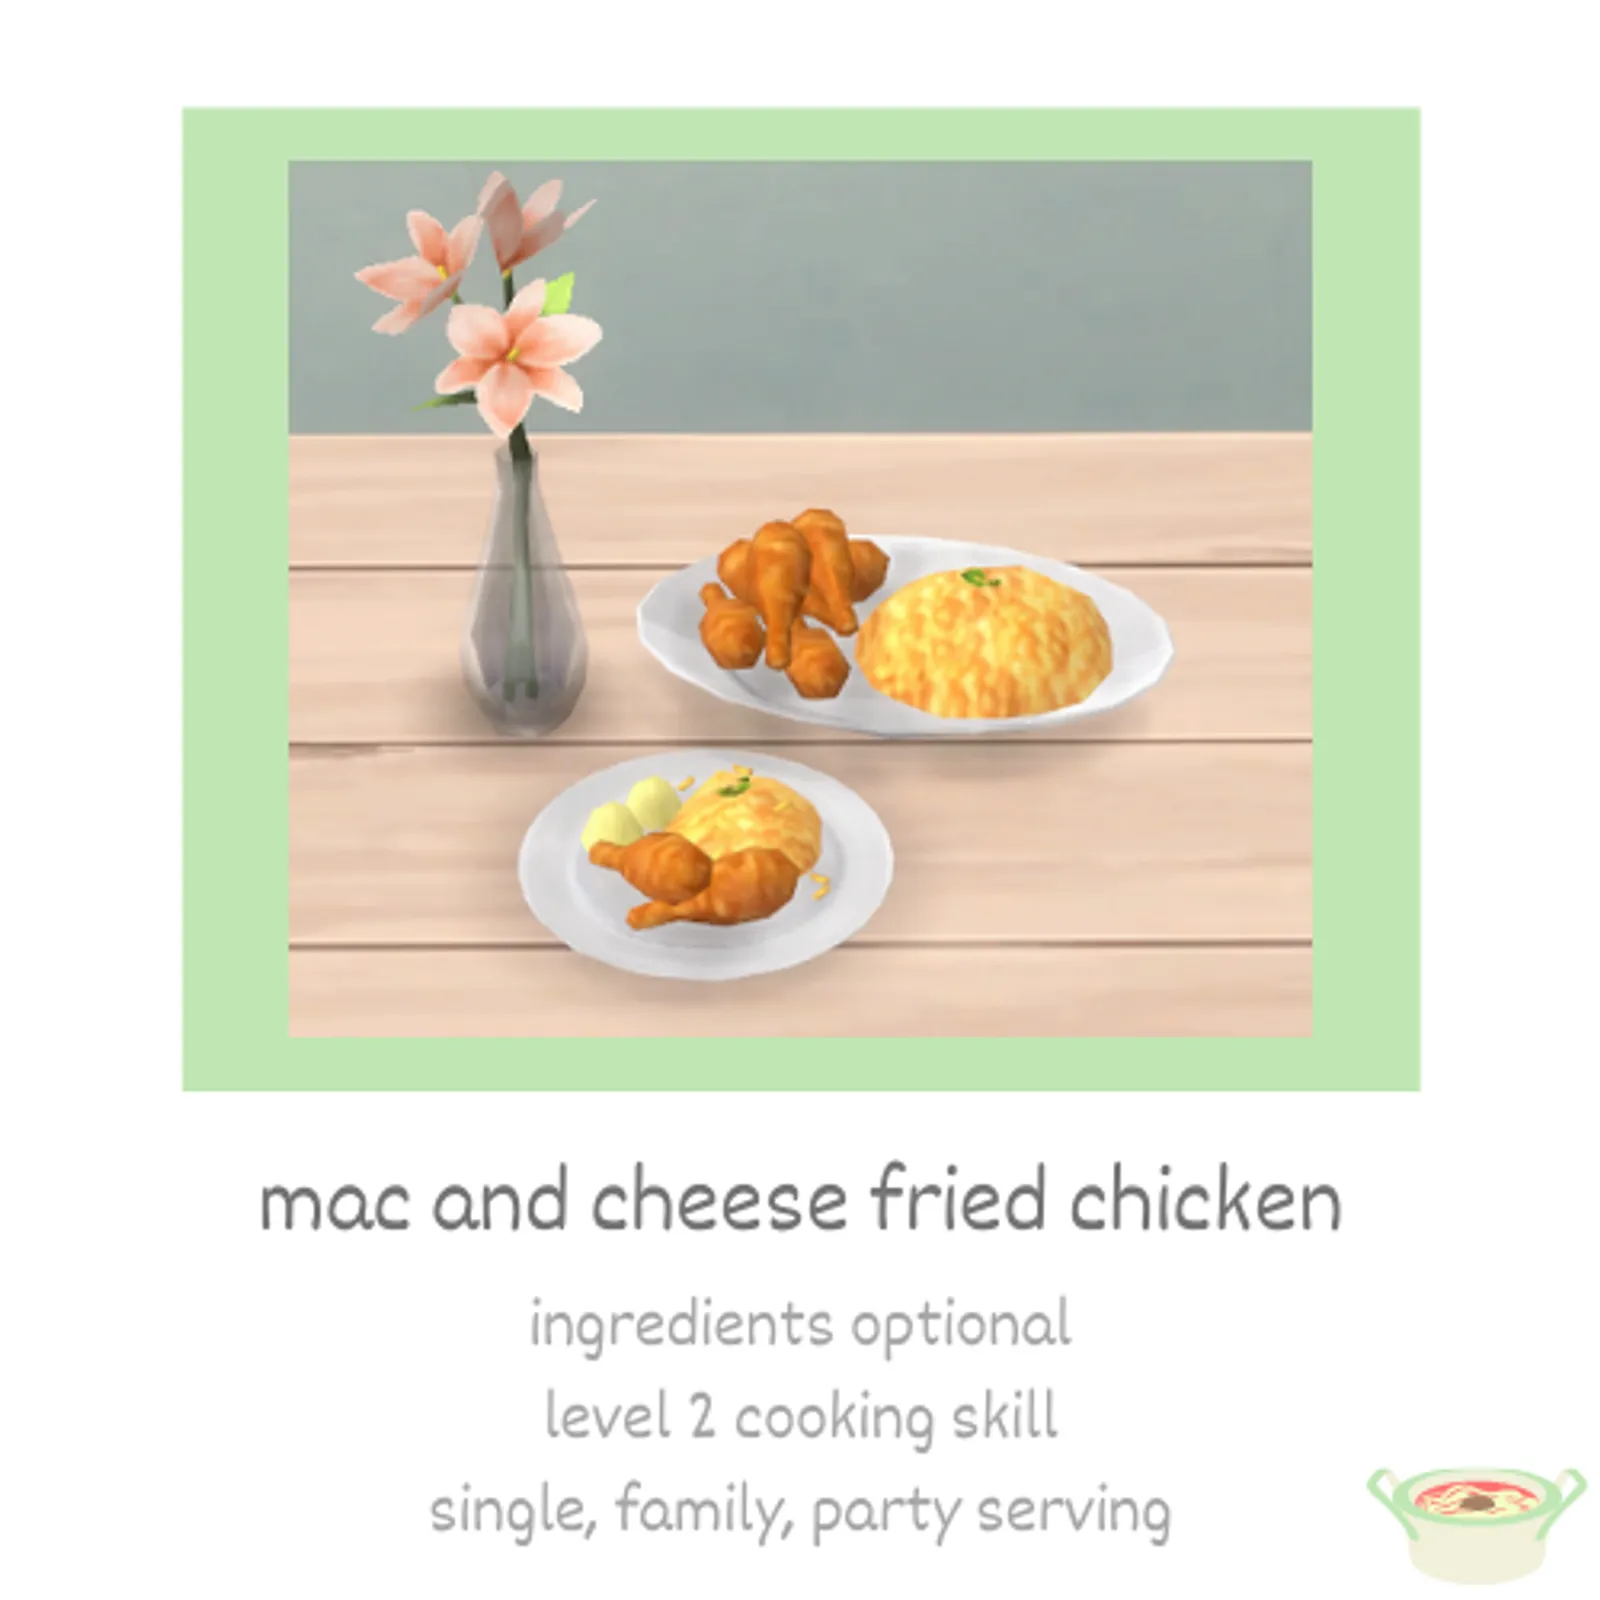 mac and cheese fried chicken